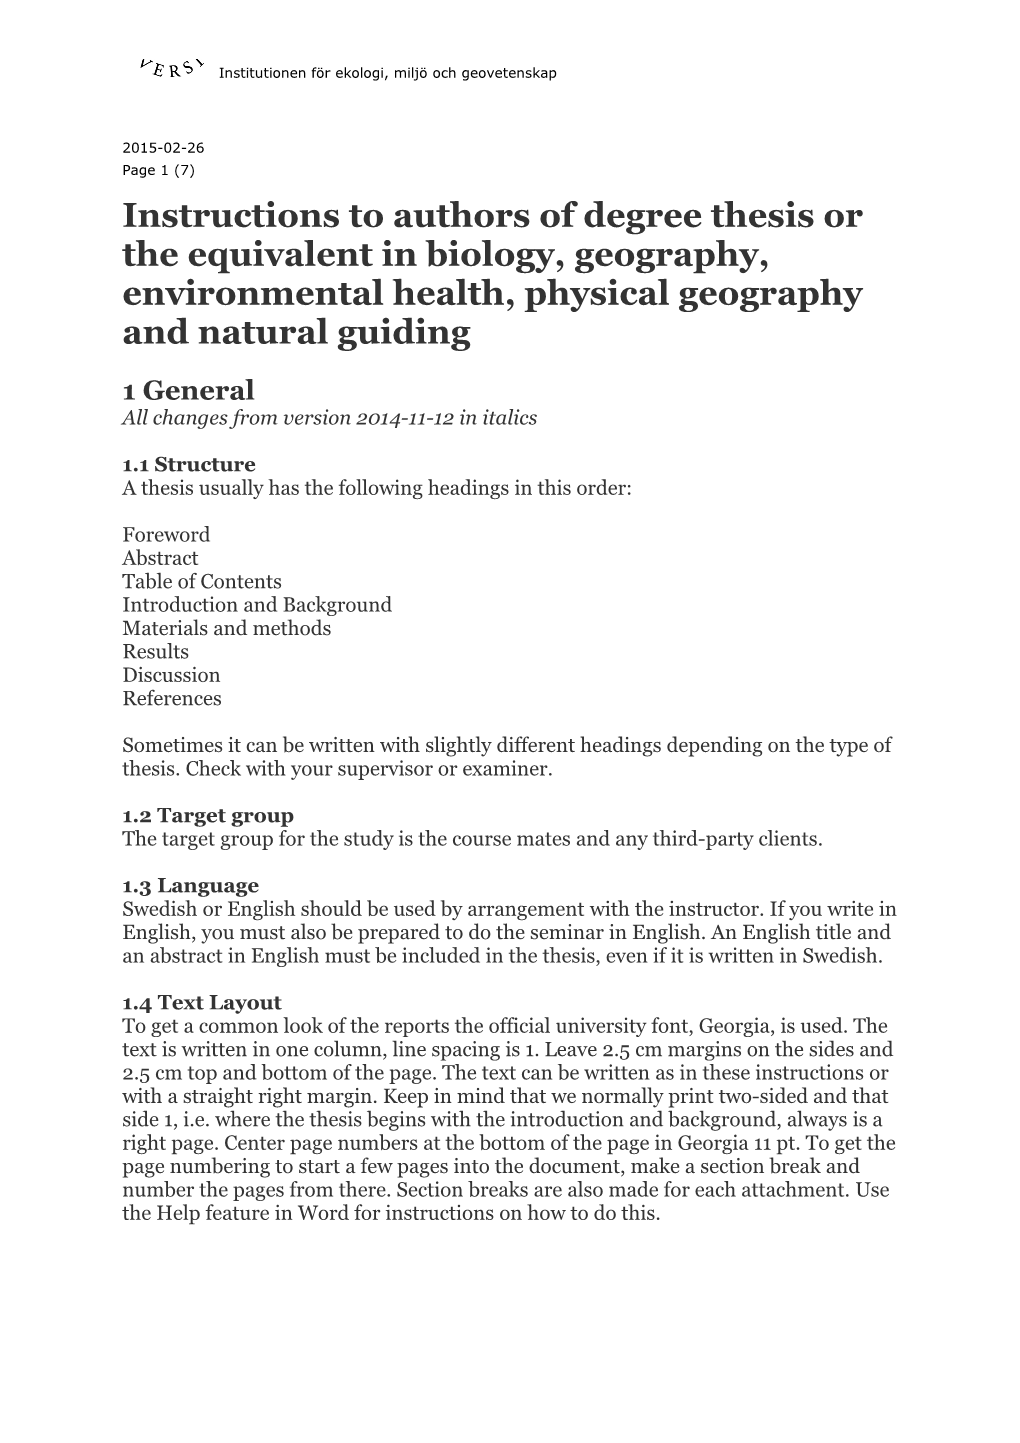 Instructions to Authors of Degree Thesis Or the Equivalent in Biology, Geography, Environmental